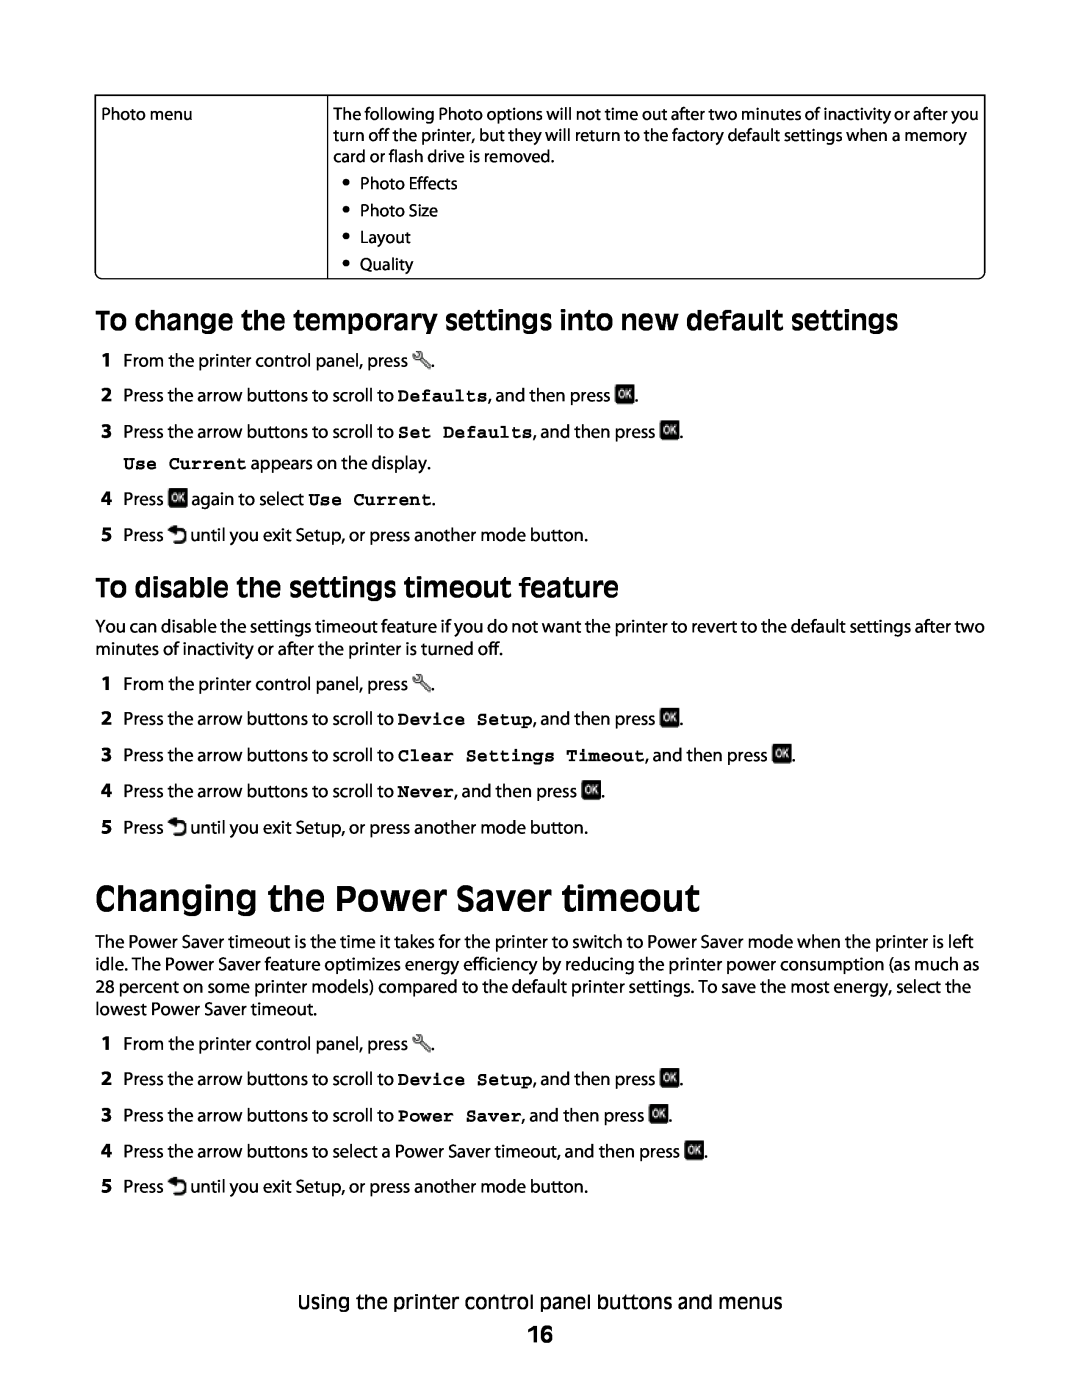 Lexmark 101, 10E manual Changing the Power Saver timeout, To disable the settings timeout feature 